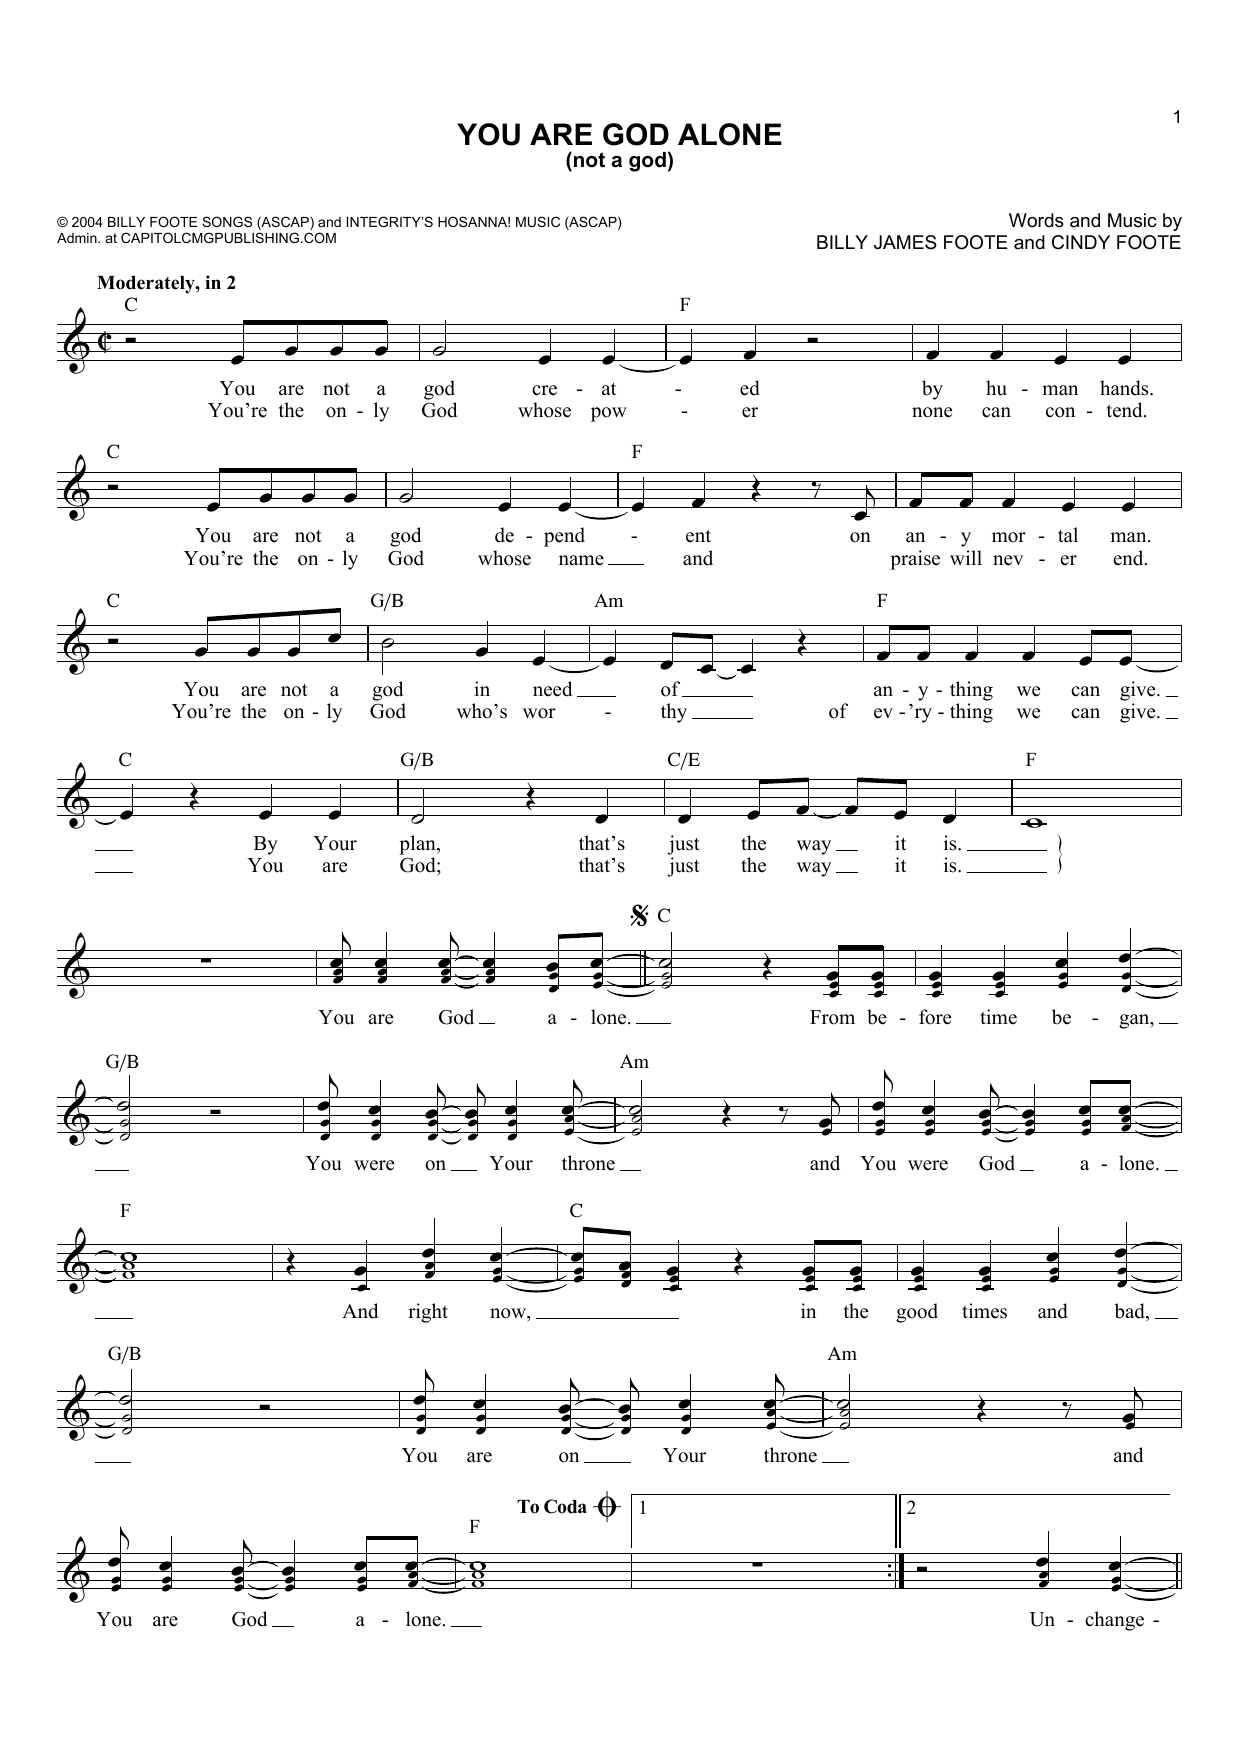 Download Phillips, Craig & Dean You Are God Alone (Not A God) Sheet Music